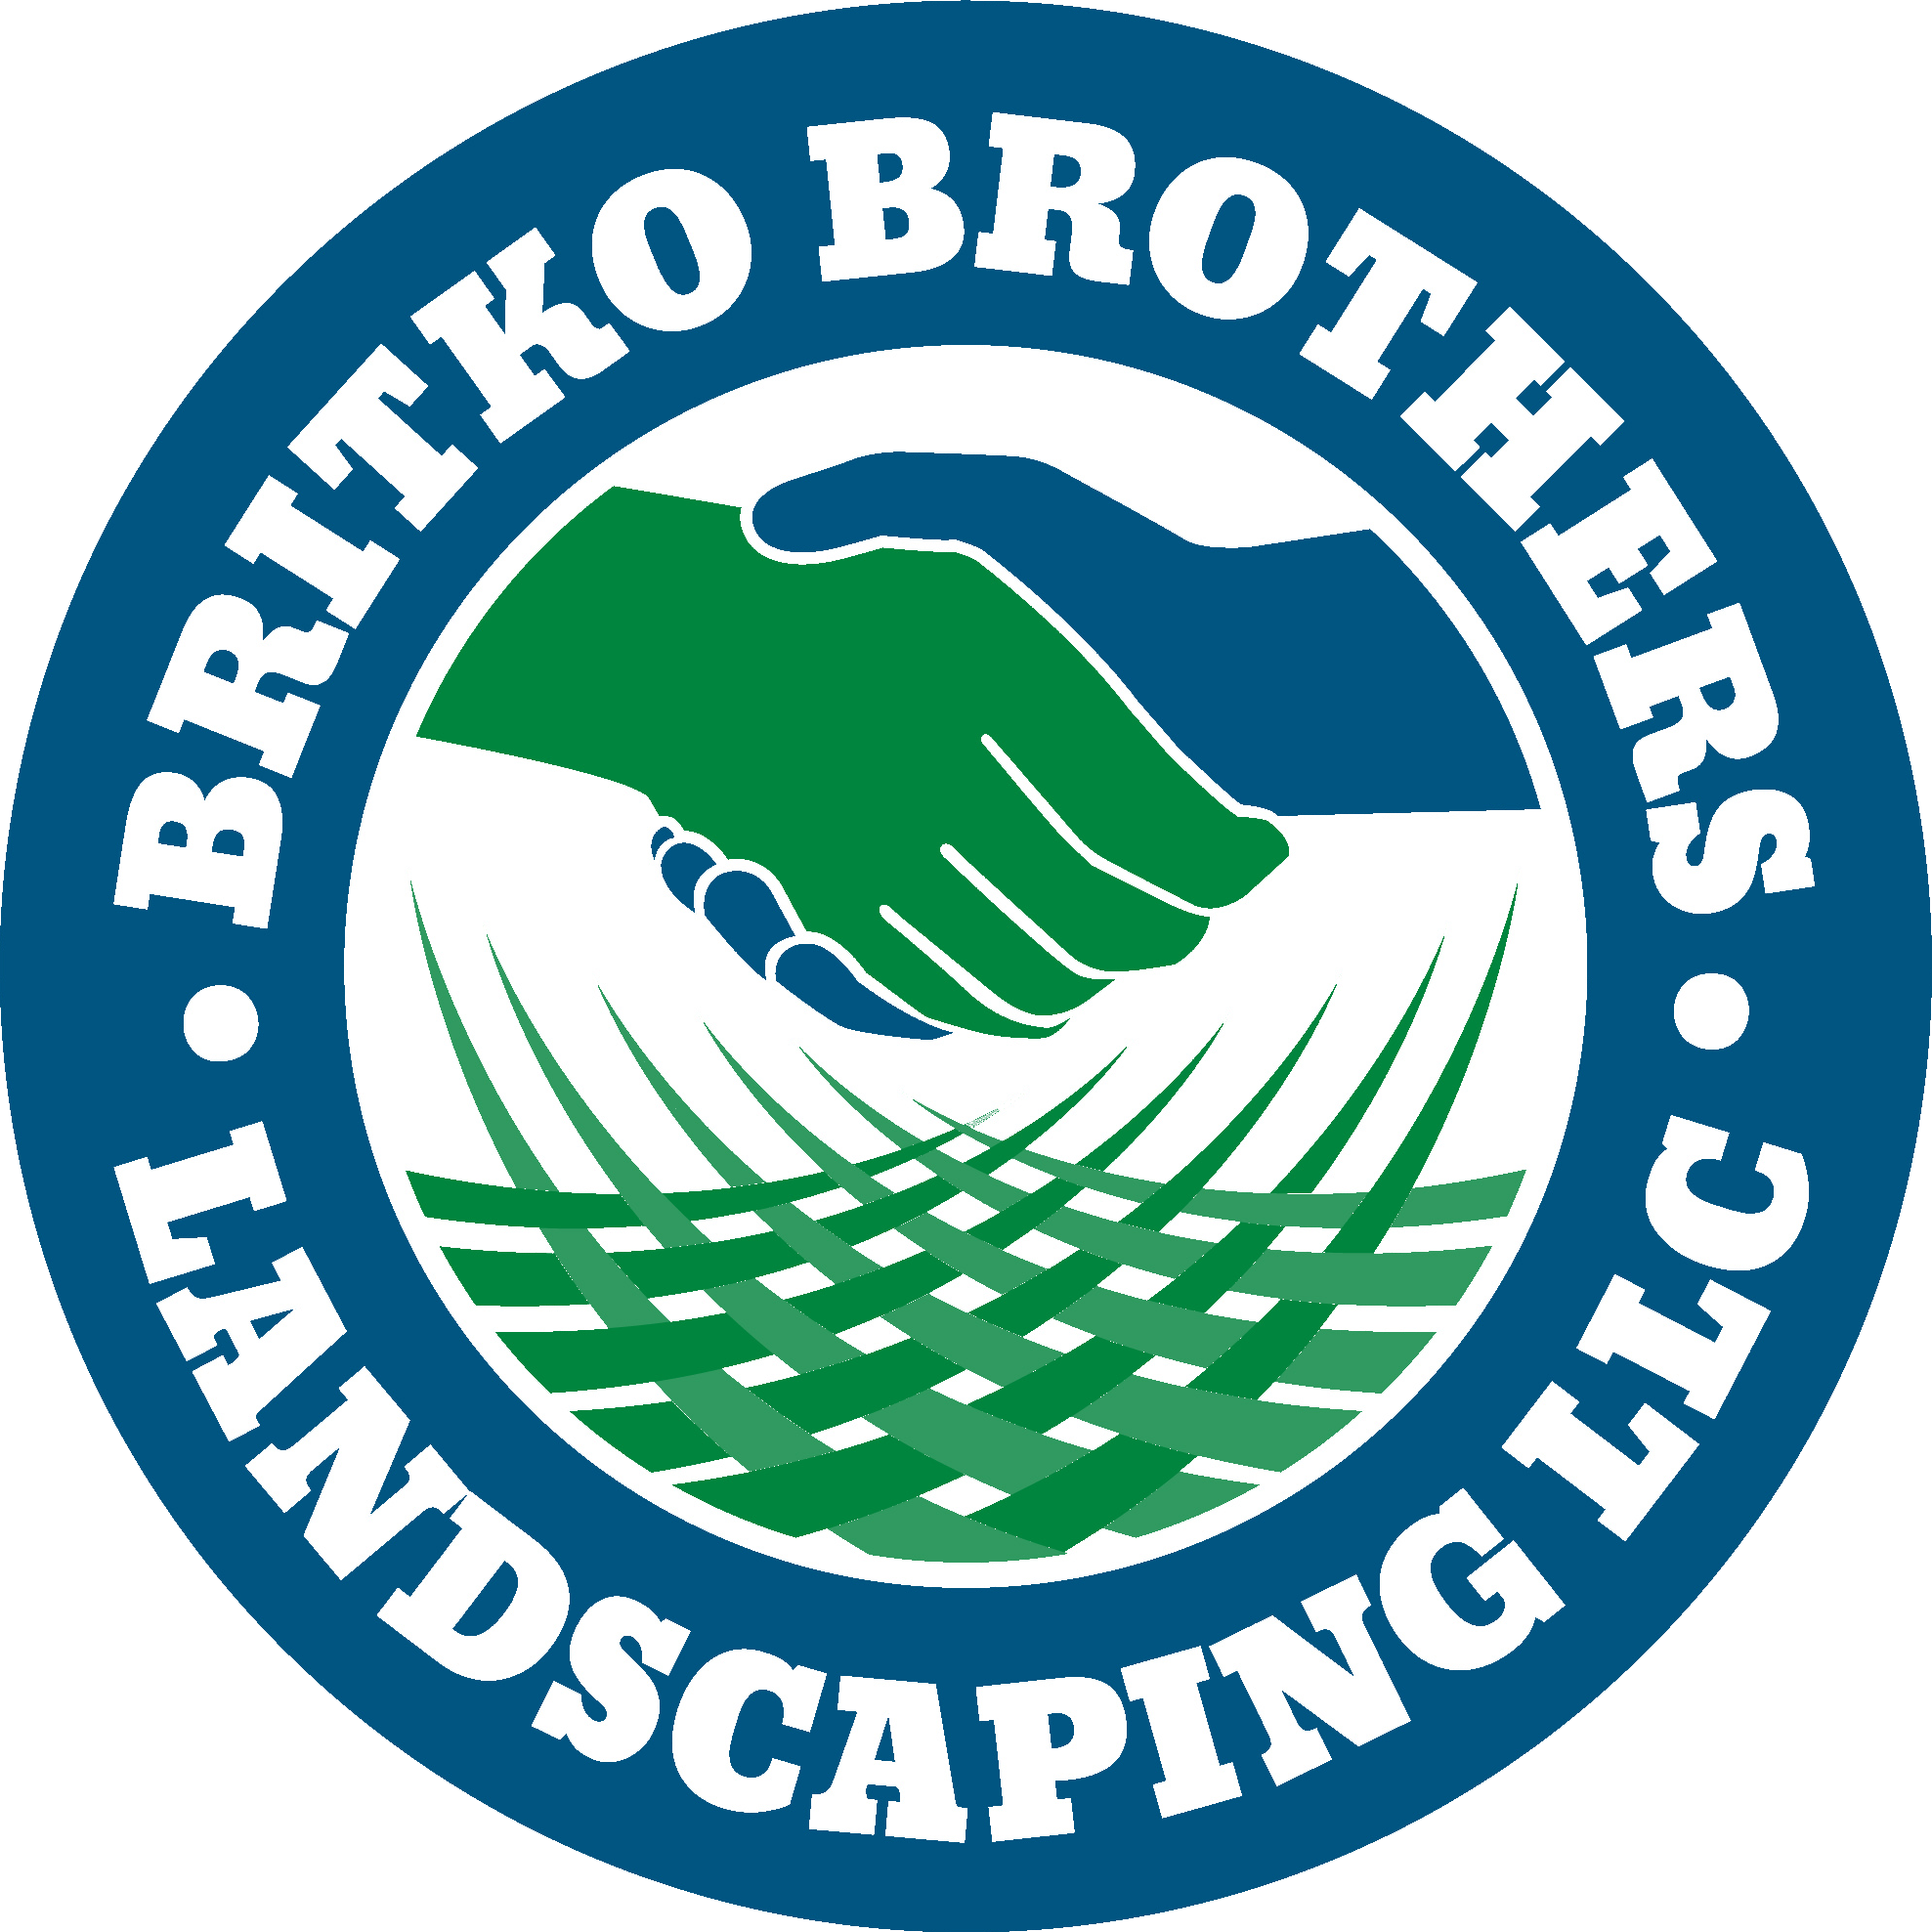 Britko Brothers Landscaping